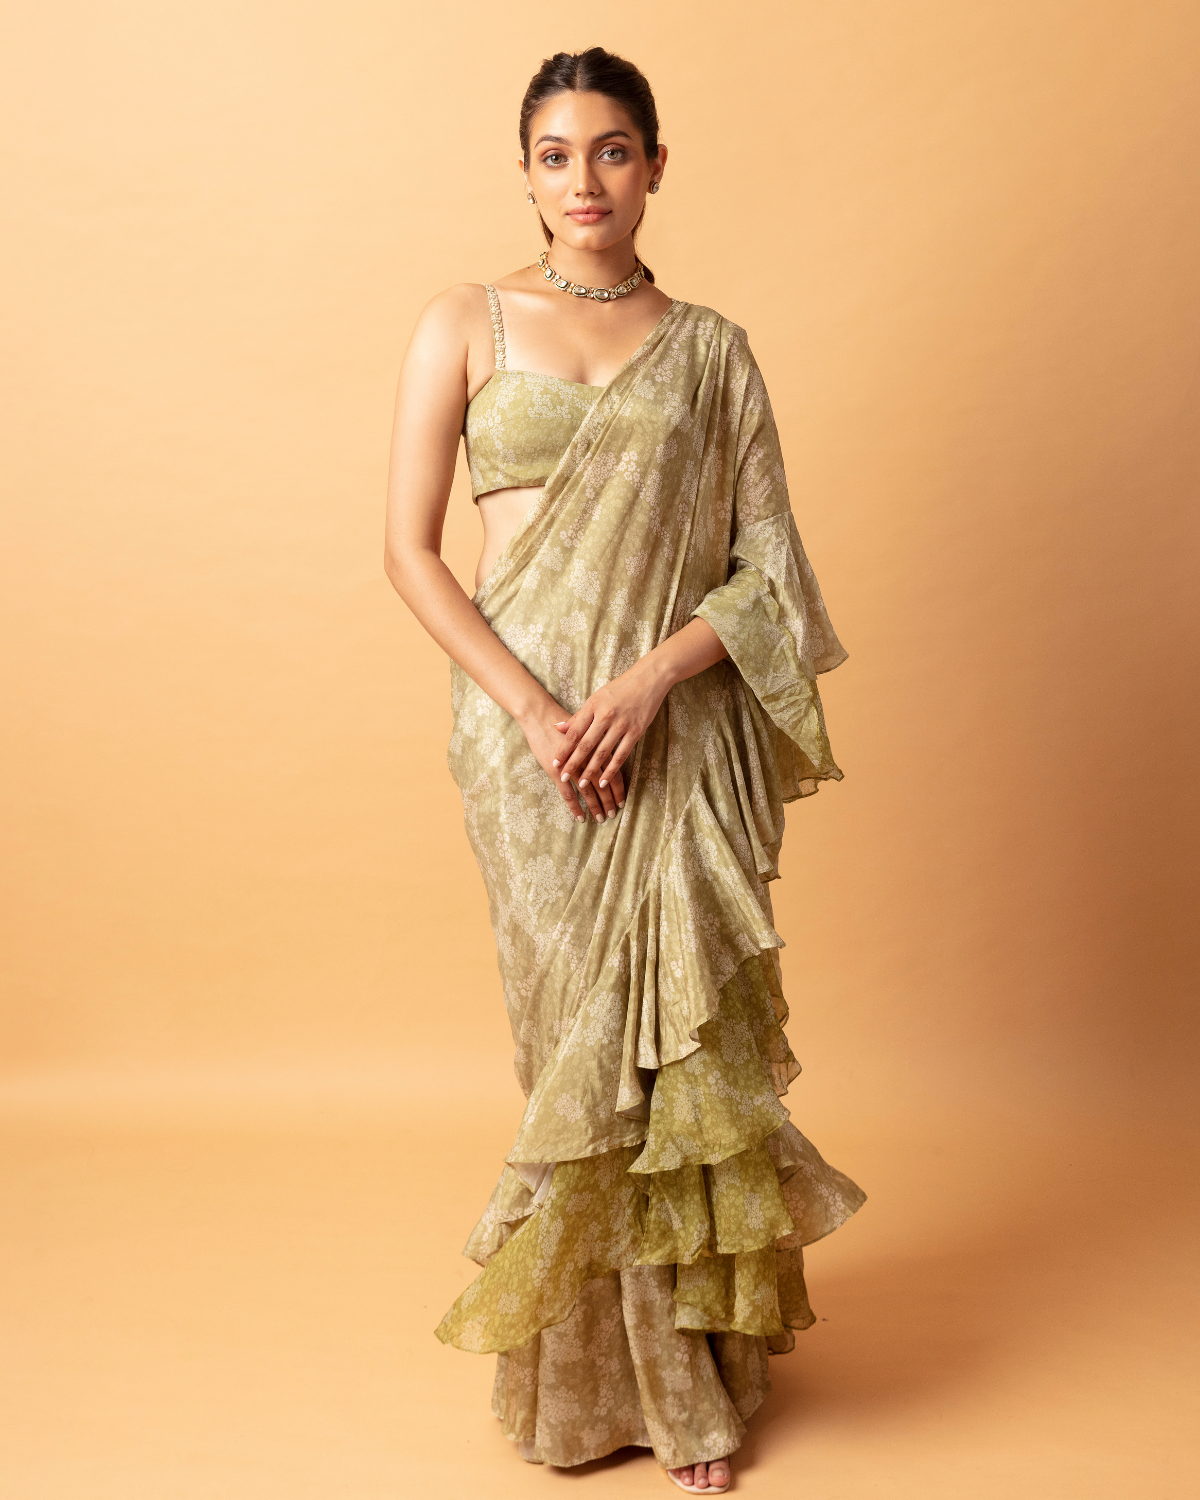 Pearl Embellished Sari Set With Cape